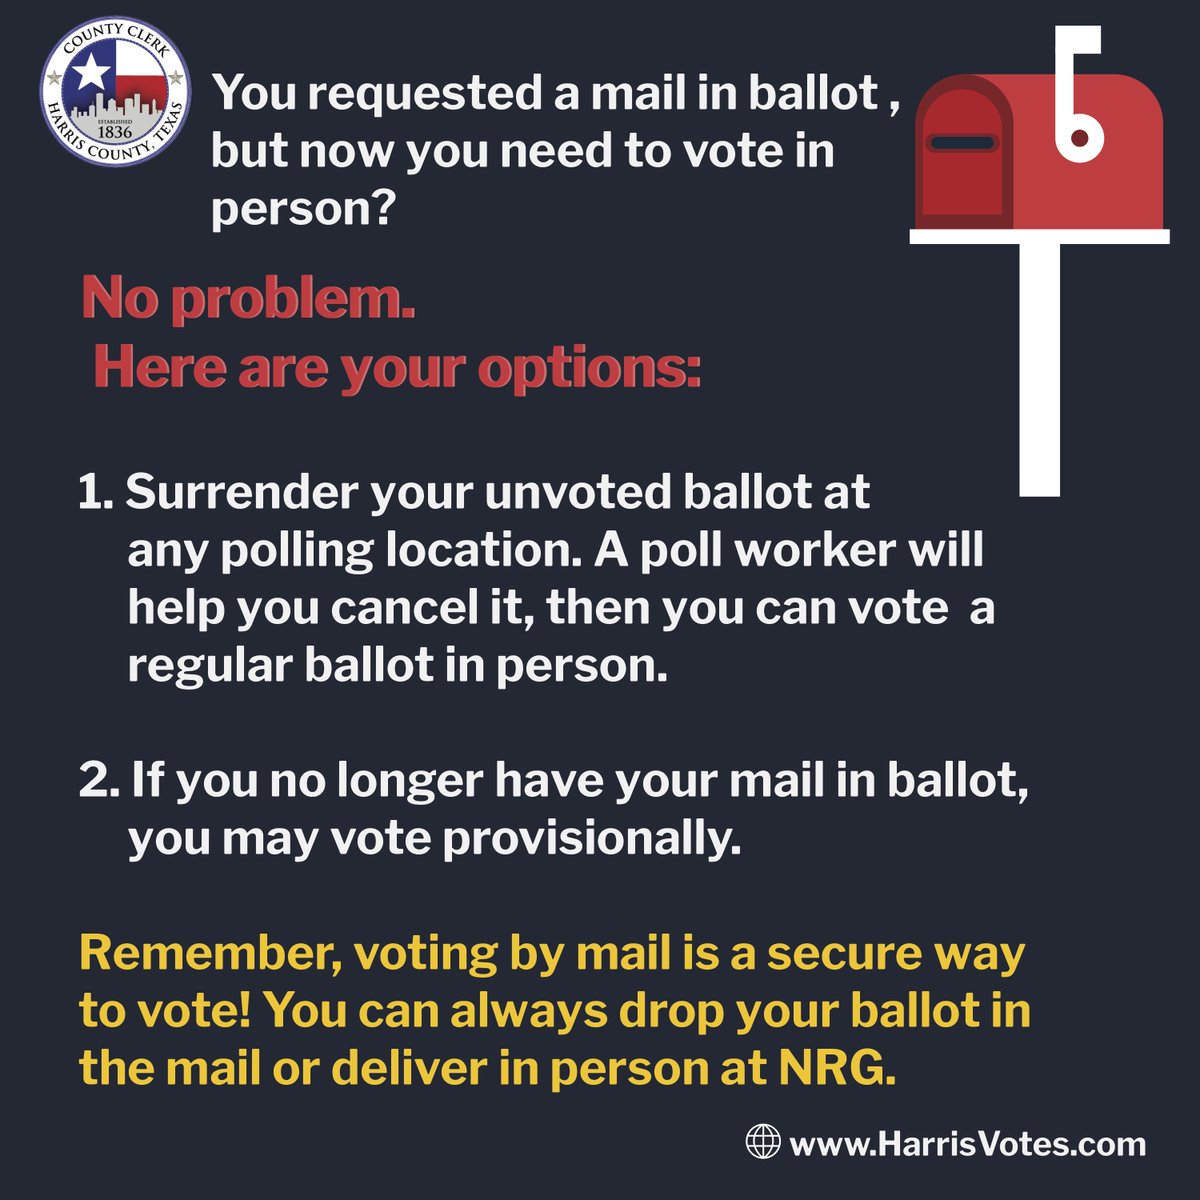 If you no longer wish to Vote by Mail, but applied for a ballot, bring the ballot with you to vote and surrender it to the election clerk, then vote in-person at the location.  #HarrisVotes